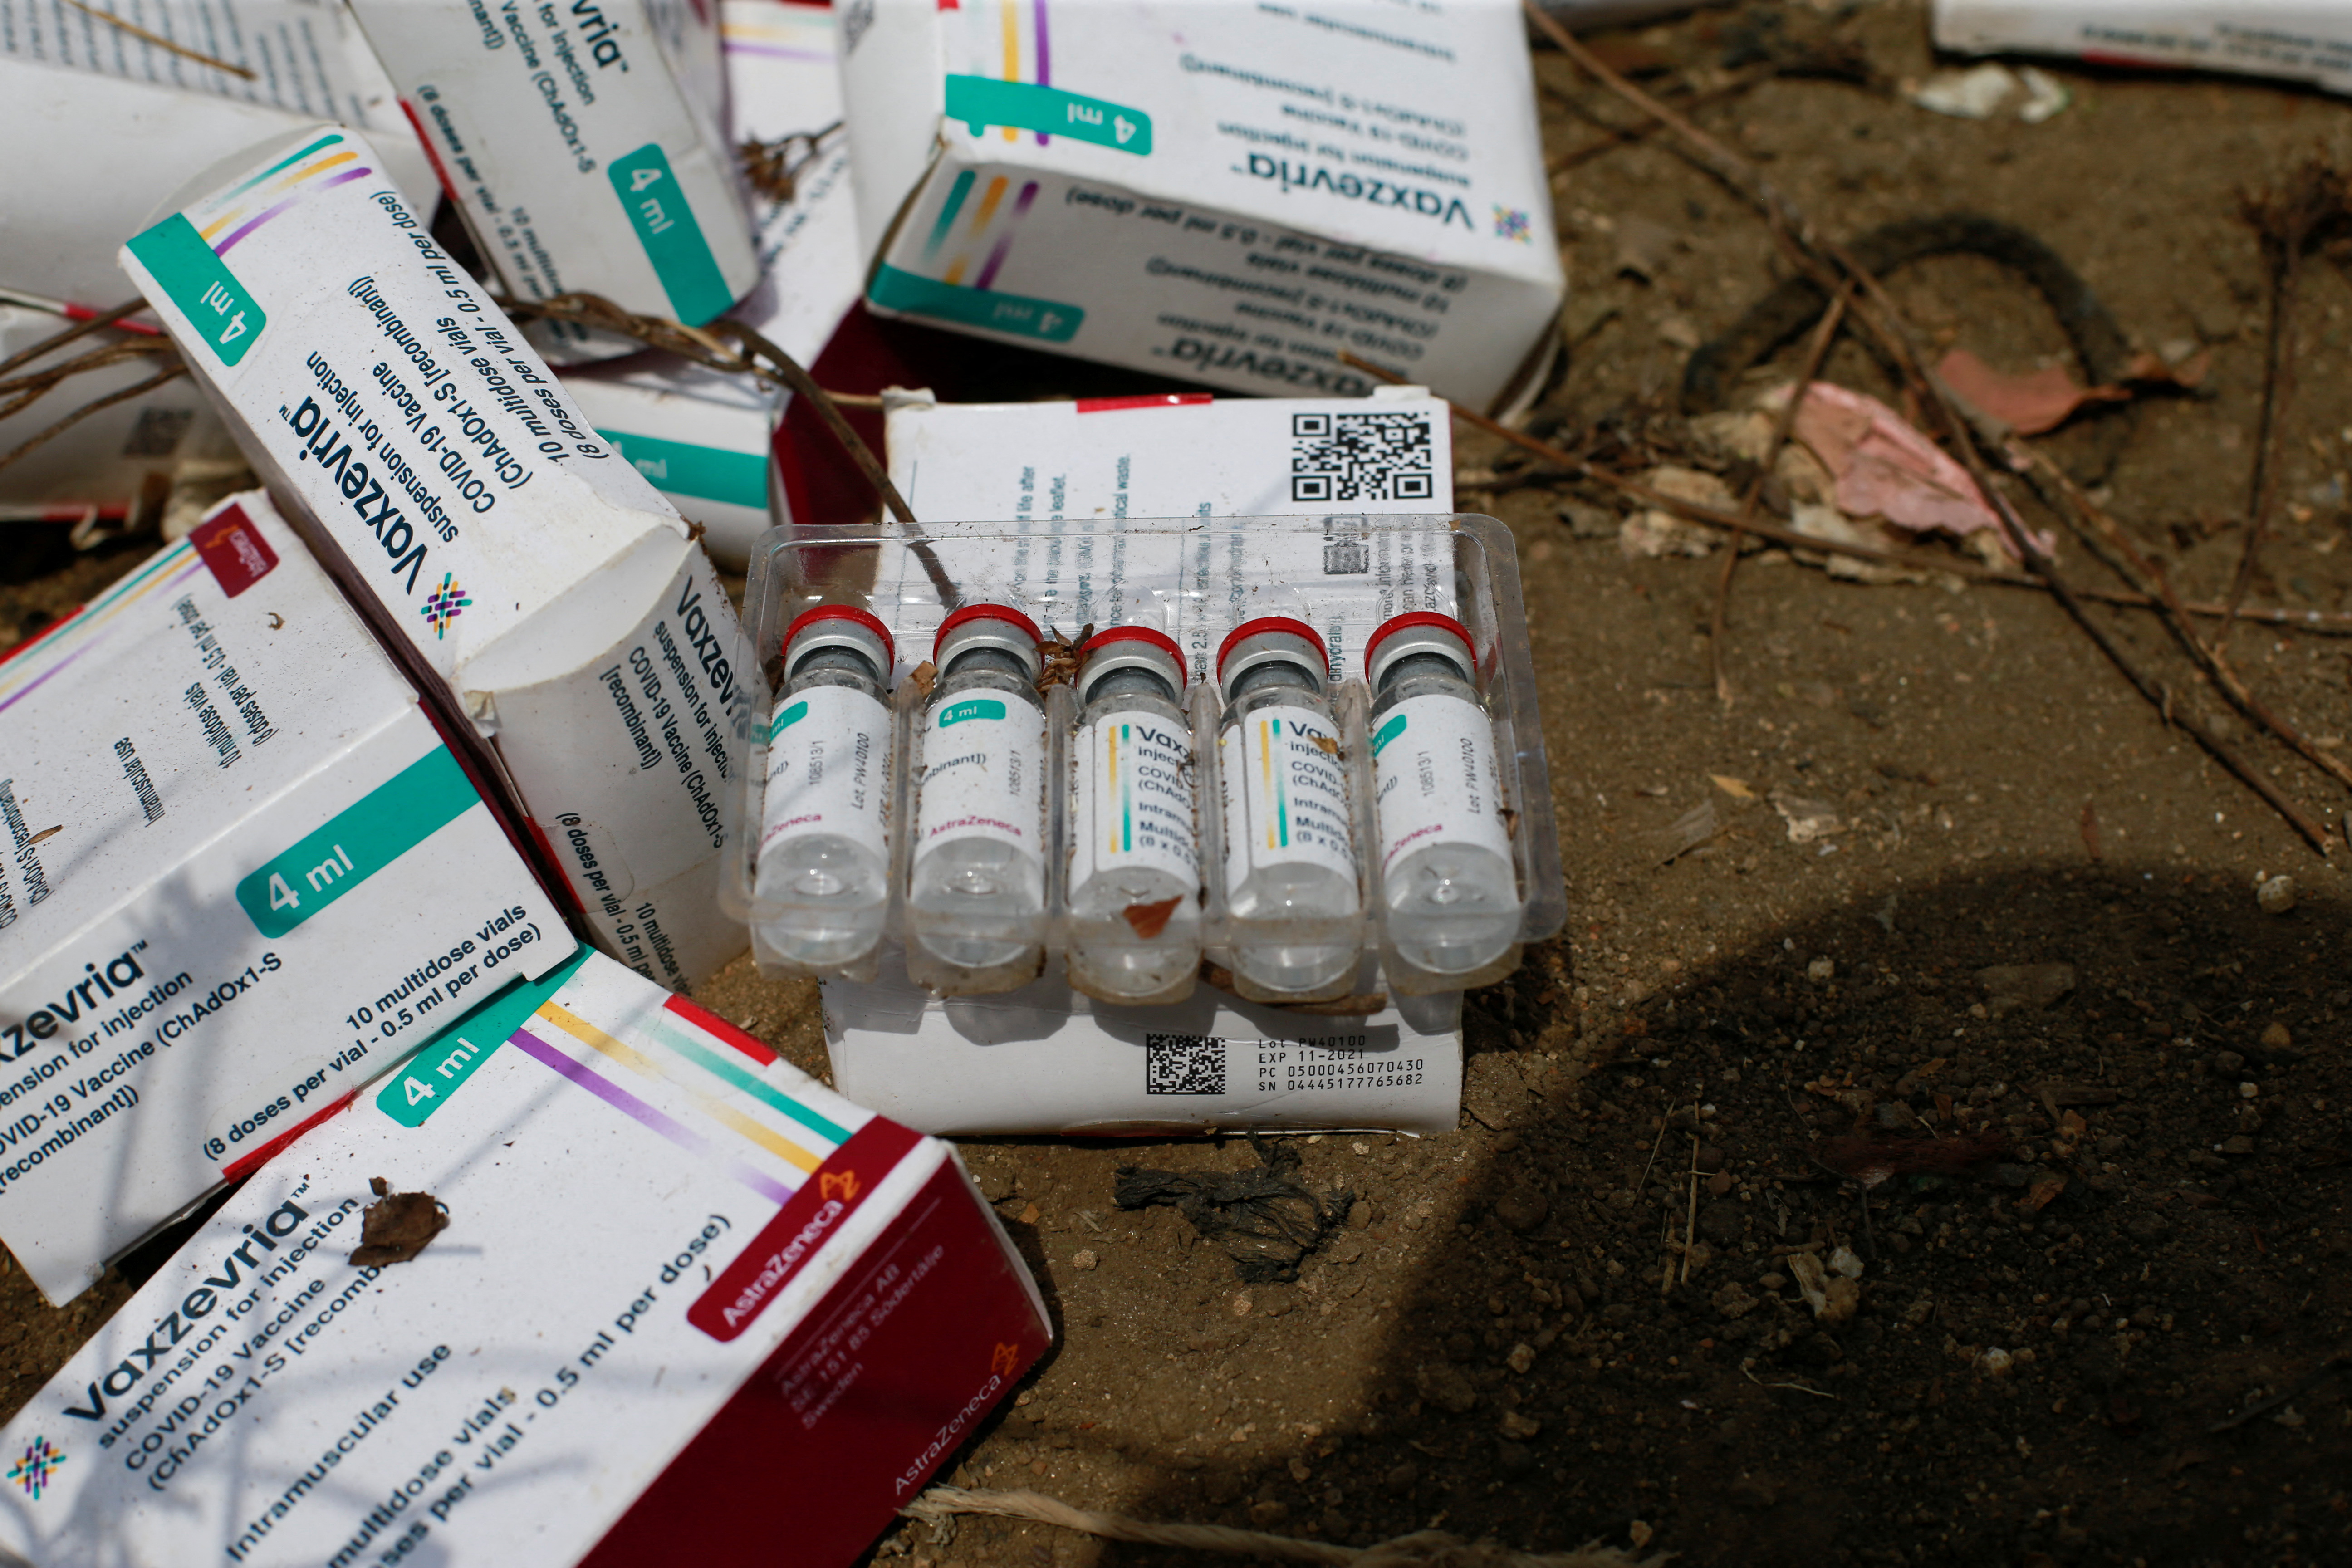 Some samples of the expired AstraZeneca coronavirus disease (Covid-19) vaccines are seen at the Gosa dump site in Abuja, Nigeria, December 22, 2021. REUTERS/Afolabi Sotunde